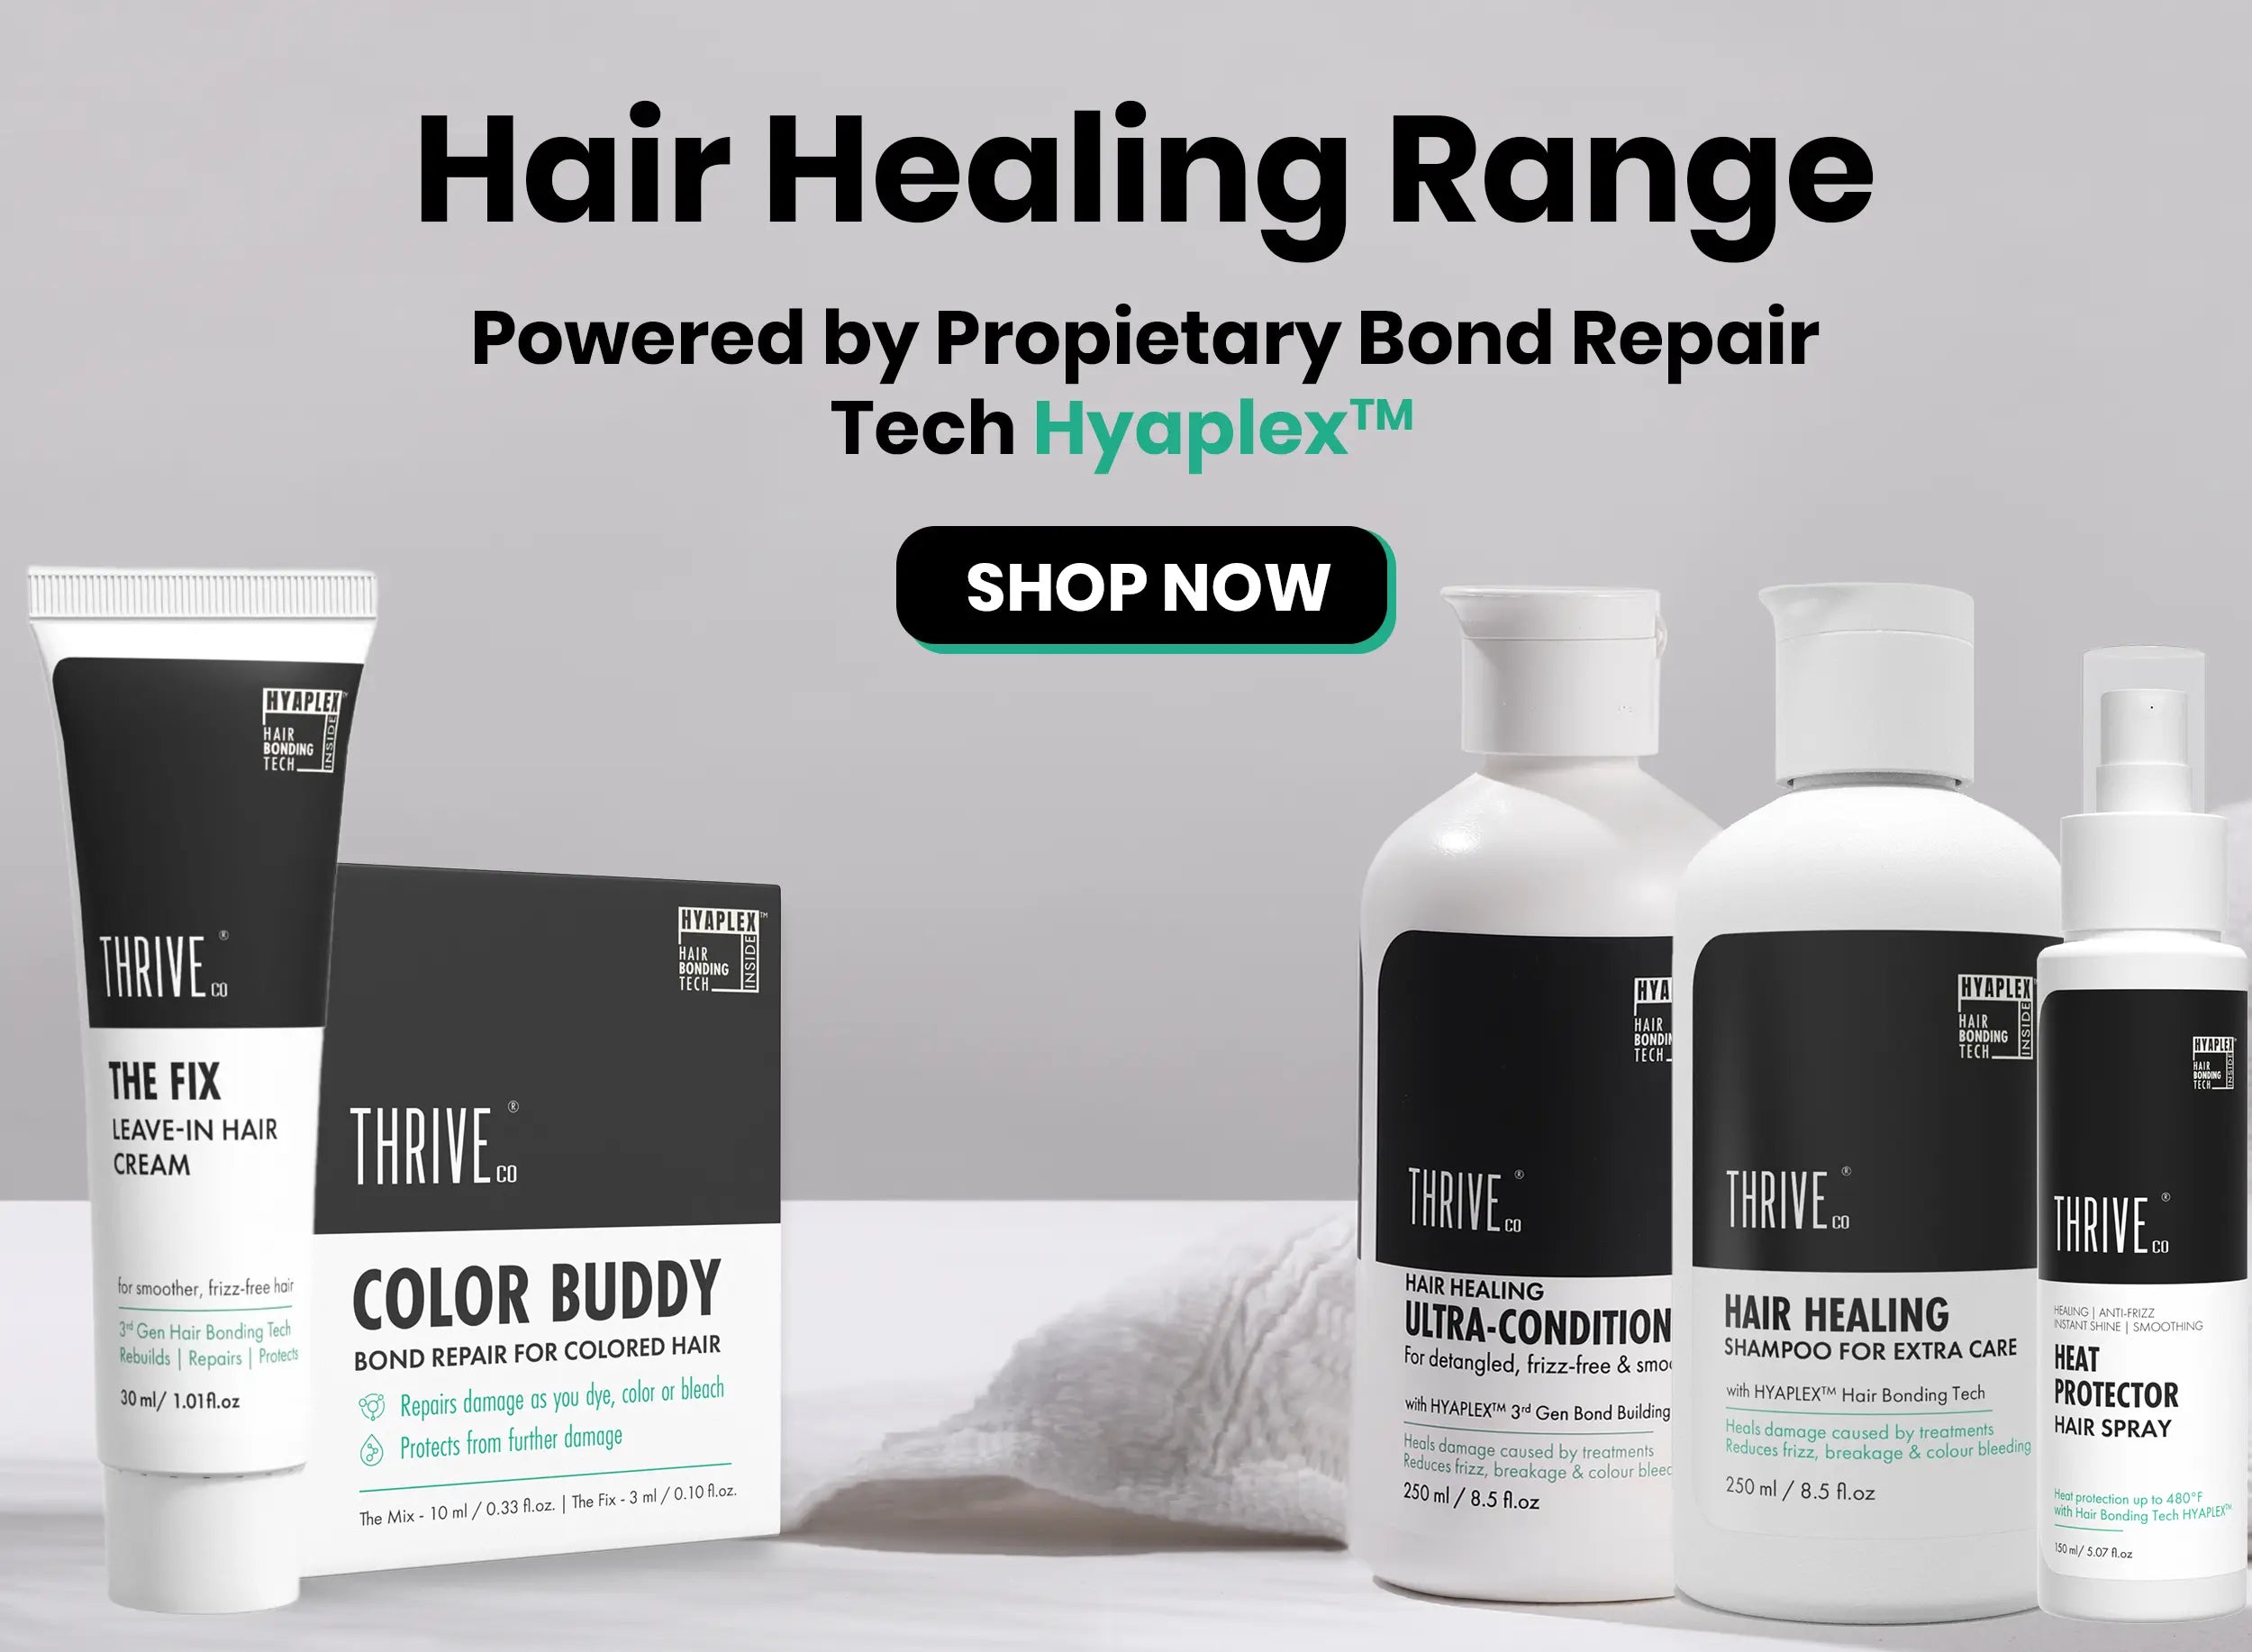 check out thriveco hair healing range powered by bond repair tech Hyaplex™ products